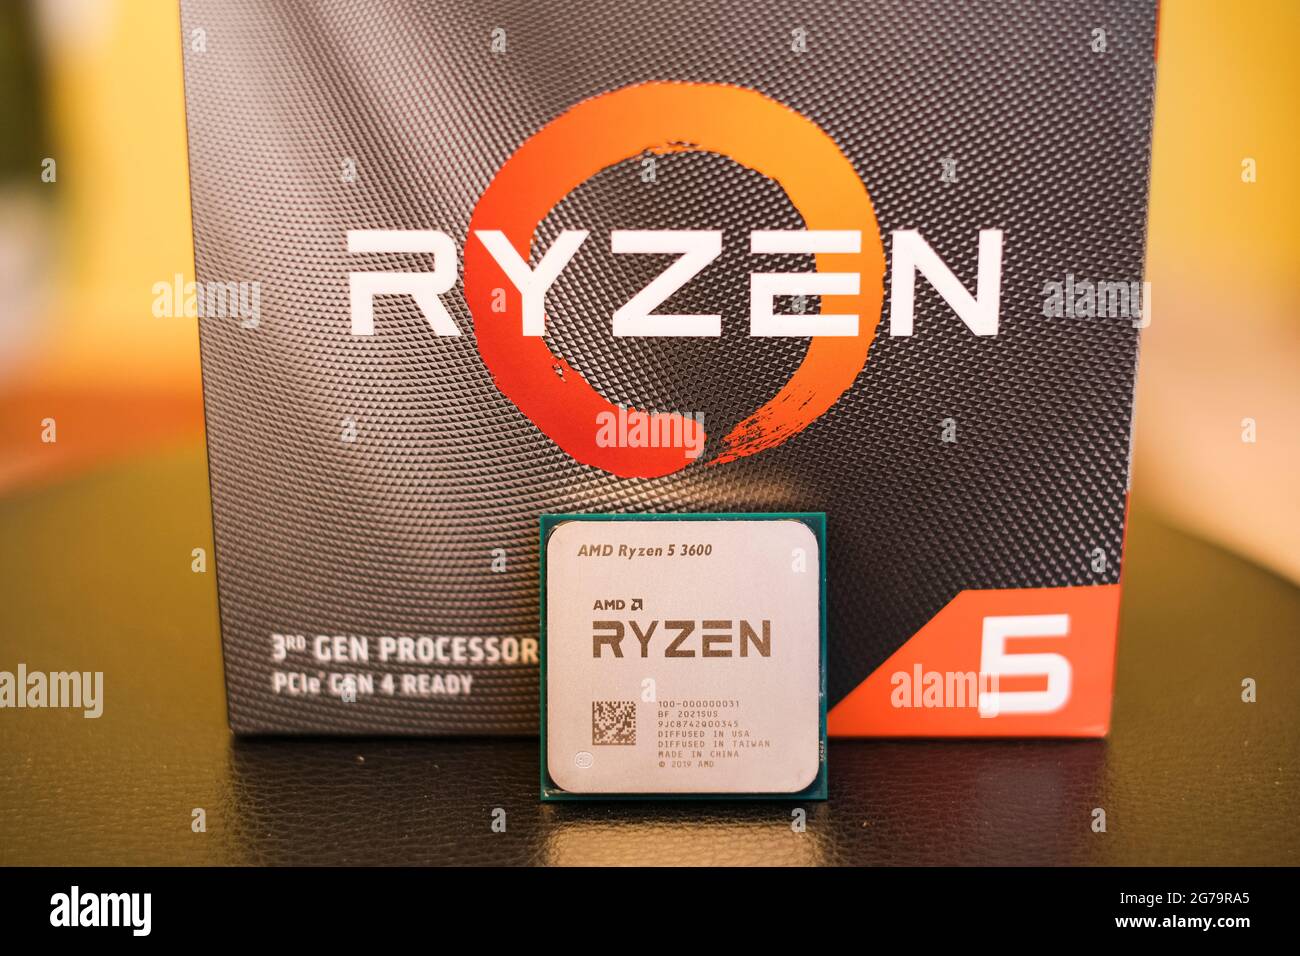 meer strip galblaas Amd ryzen 3600 desktop pc cpu with selling box package,computer components  chip Stock Photo - Alamy